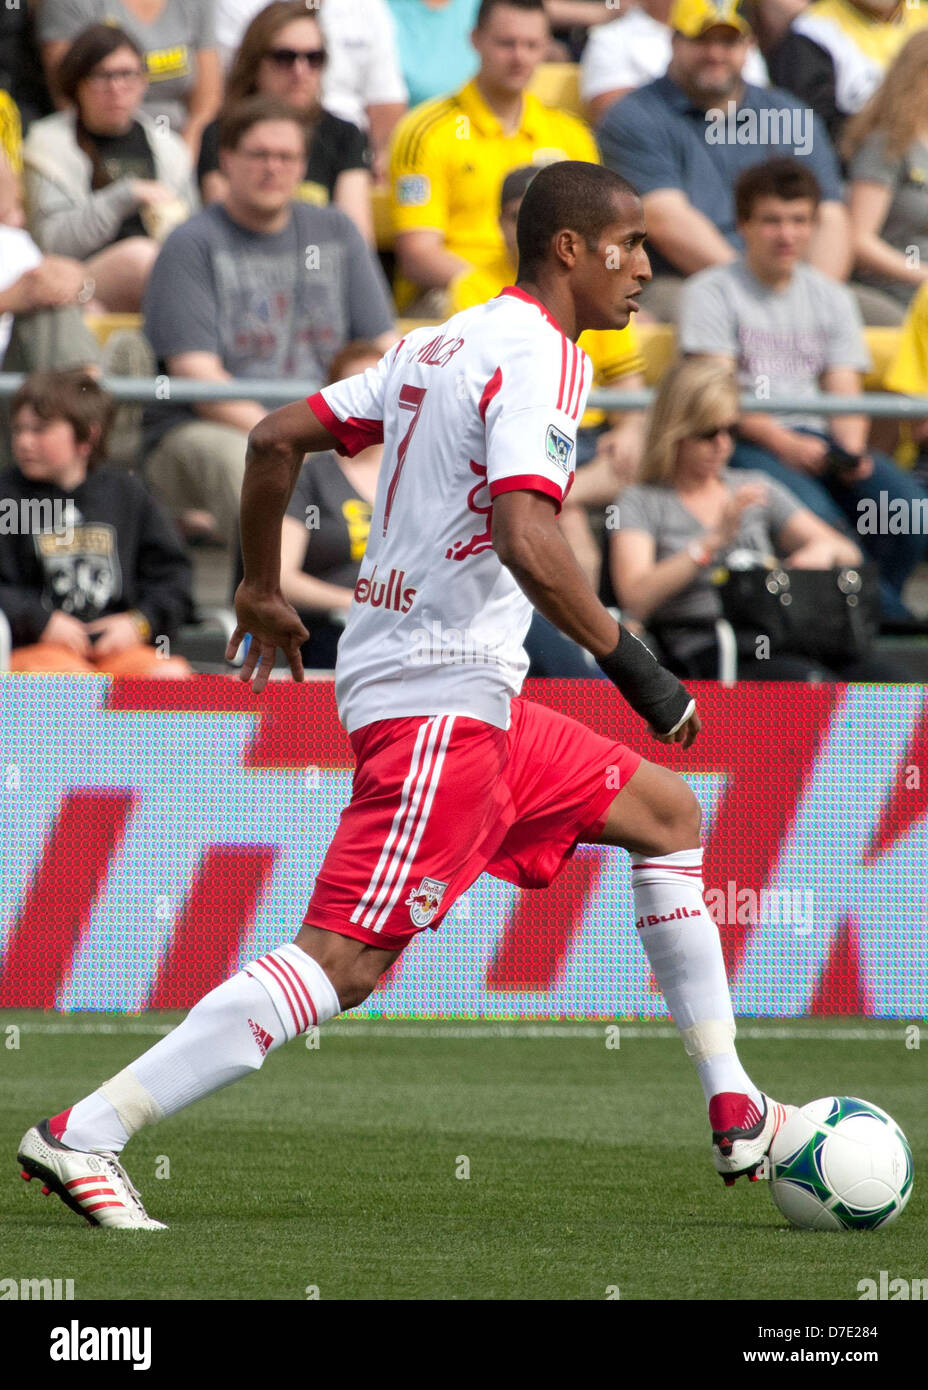 May 4, 2013 - May 04, 2013: New York Red Bulls Roy Miller (7) with the ball during the Major League Soccer match between the New York Red Bulls and the Columbus Crew at Columbus Crew Stadium in Columbus, OH Stock Photo